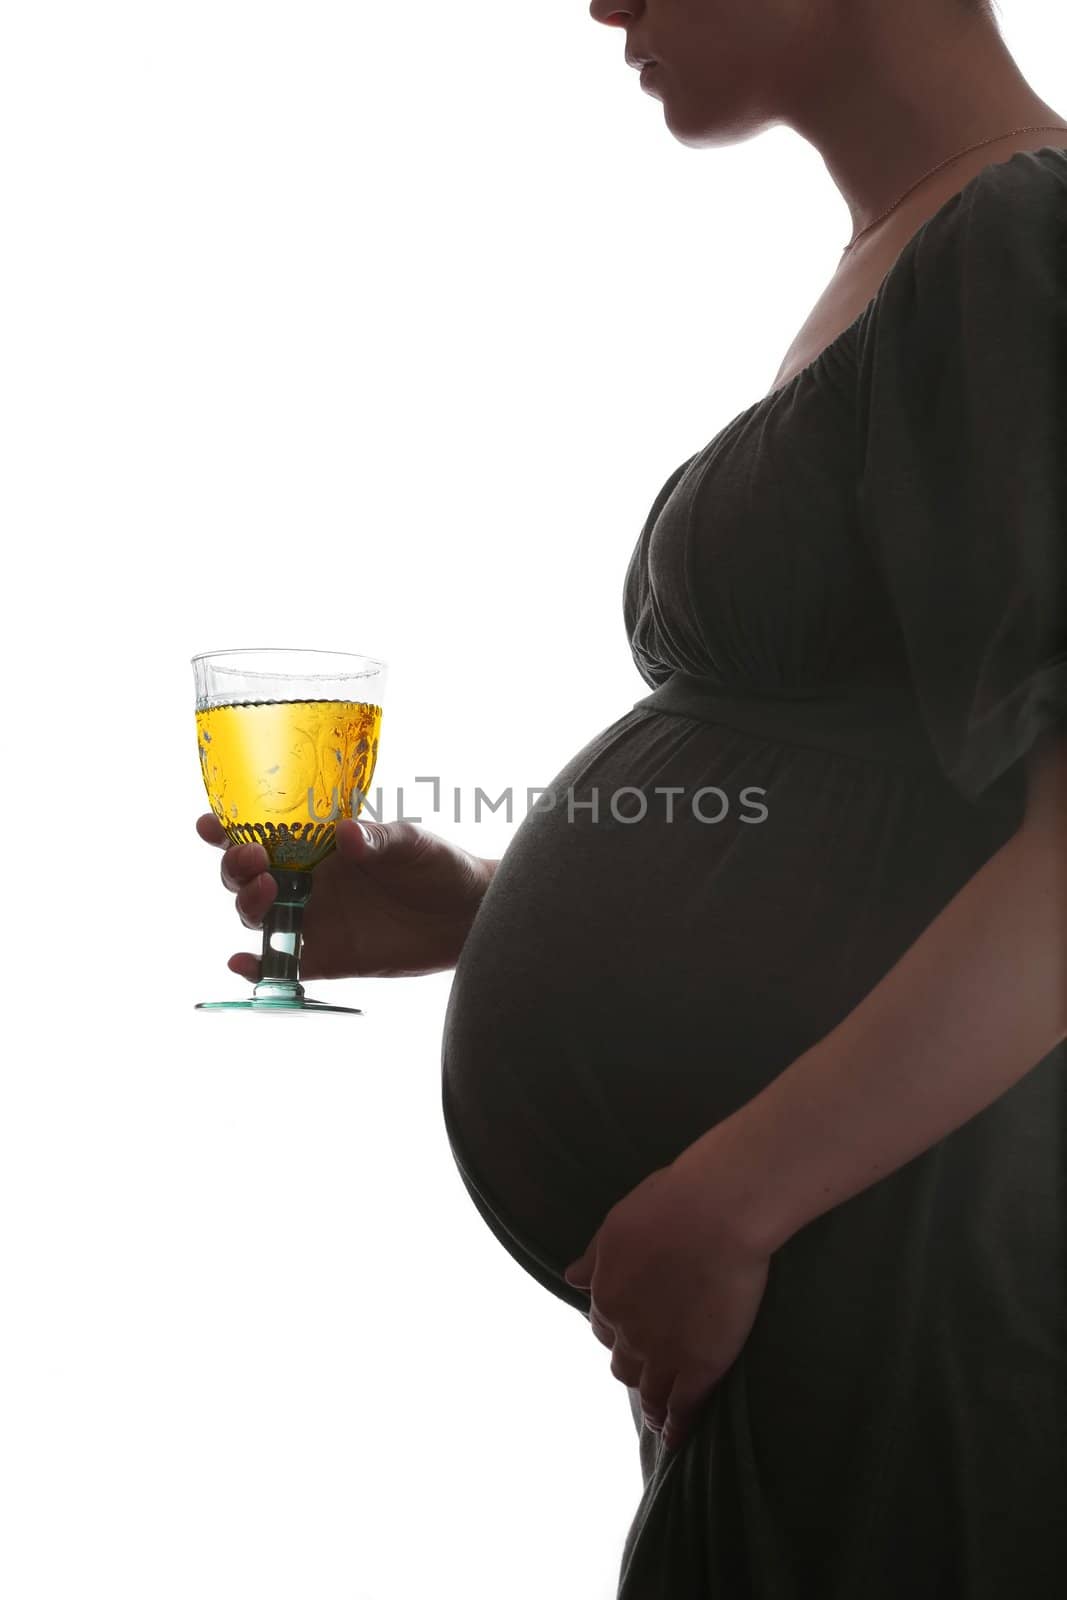 silhouette of the pregnant woman with juice in luxurious goblet on white background